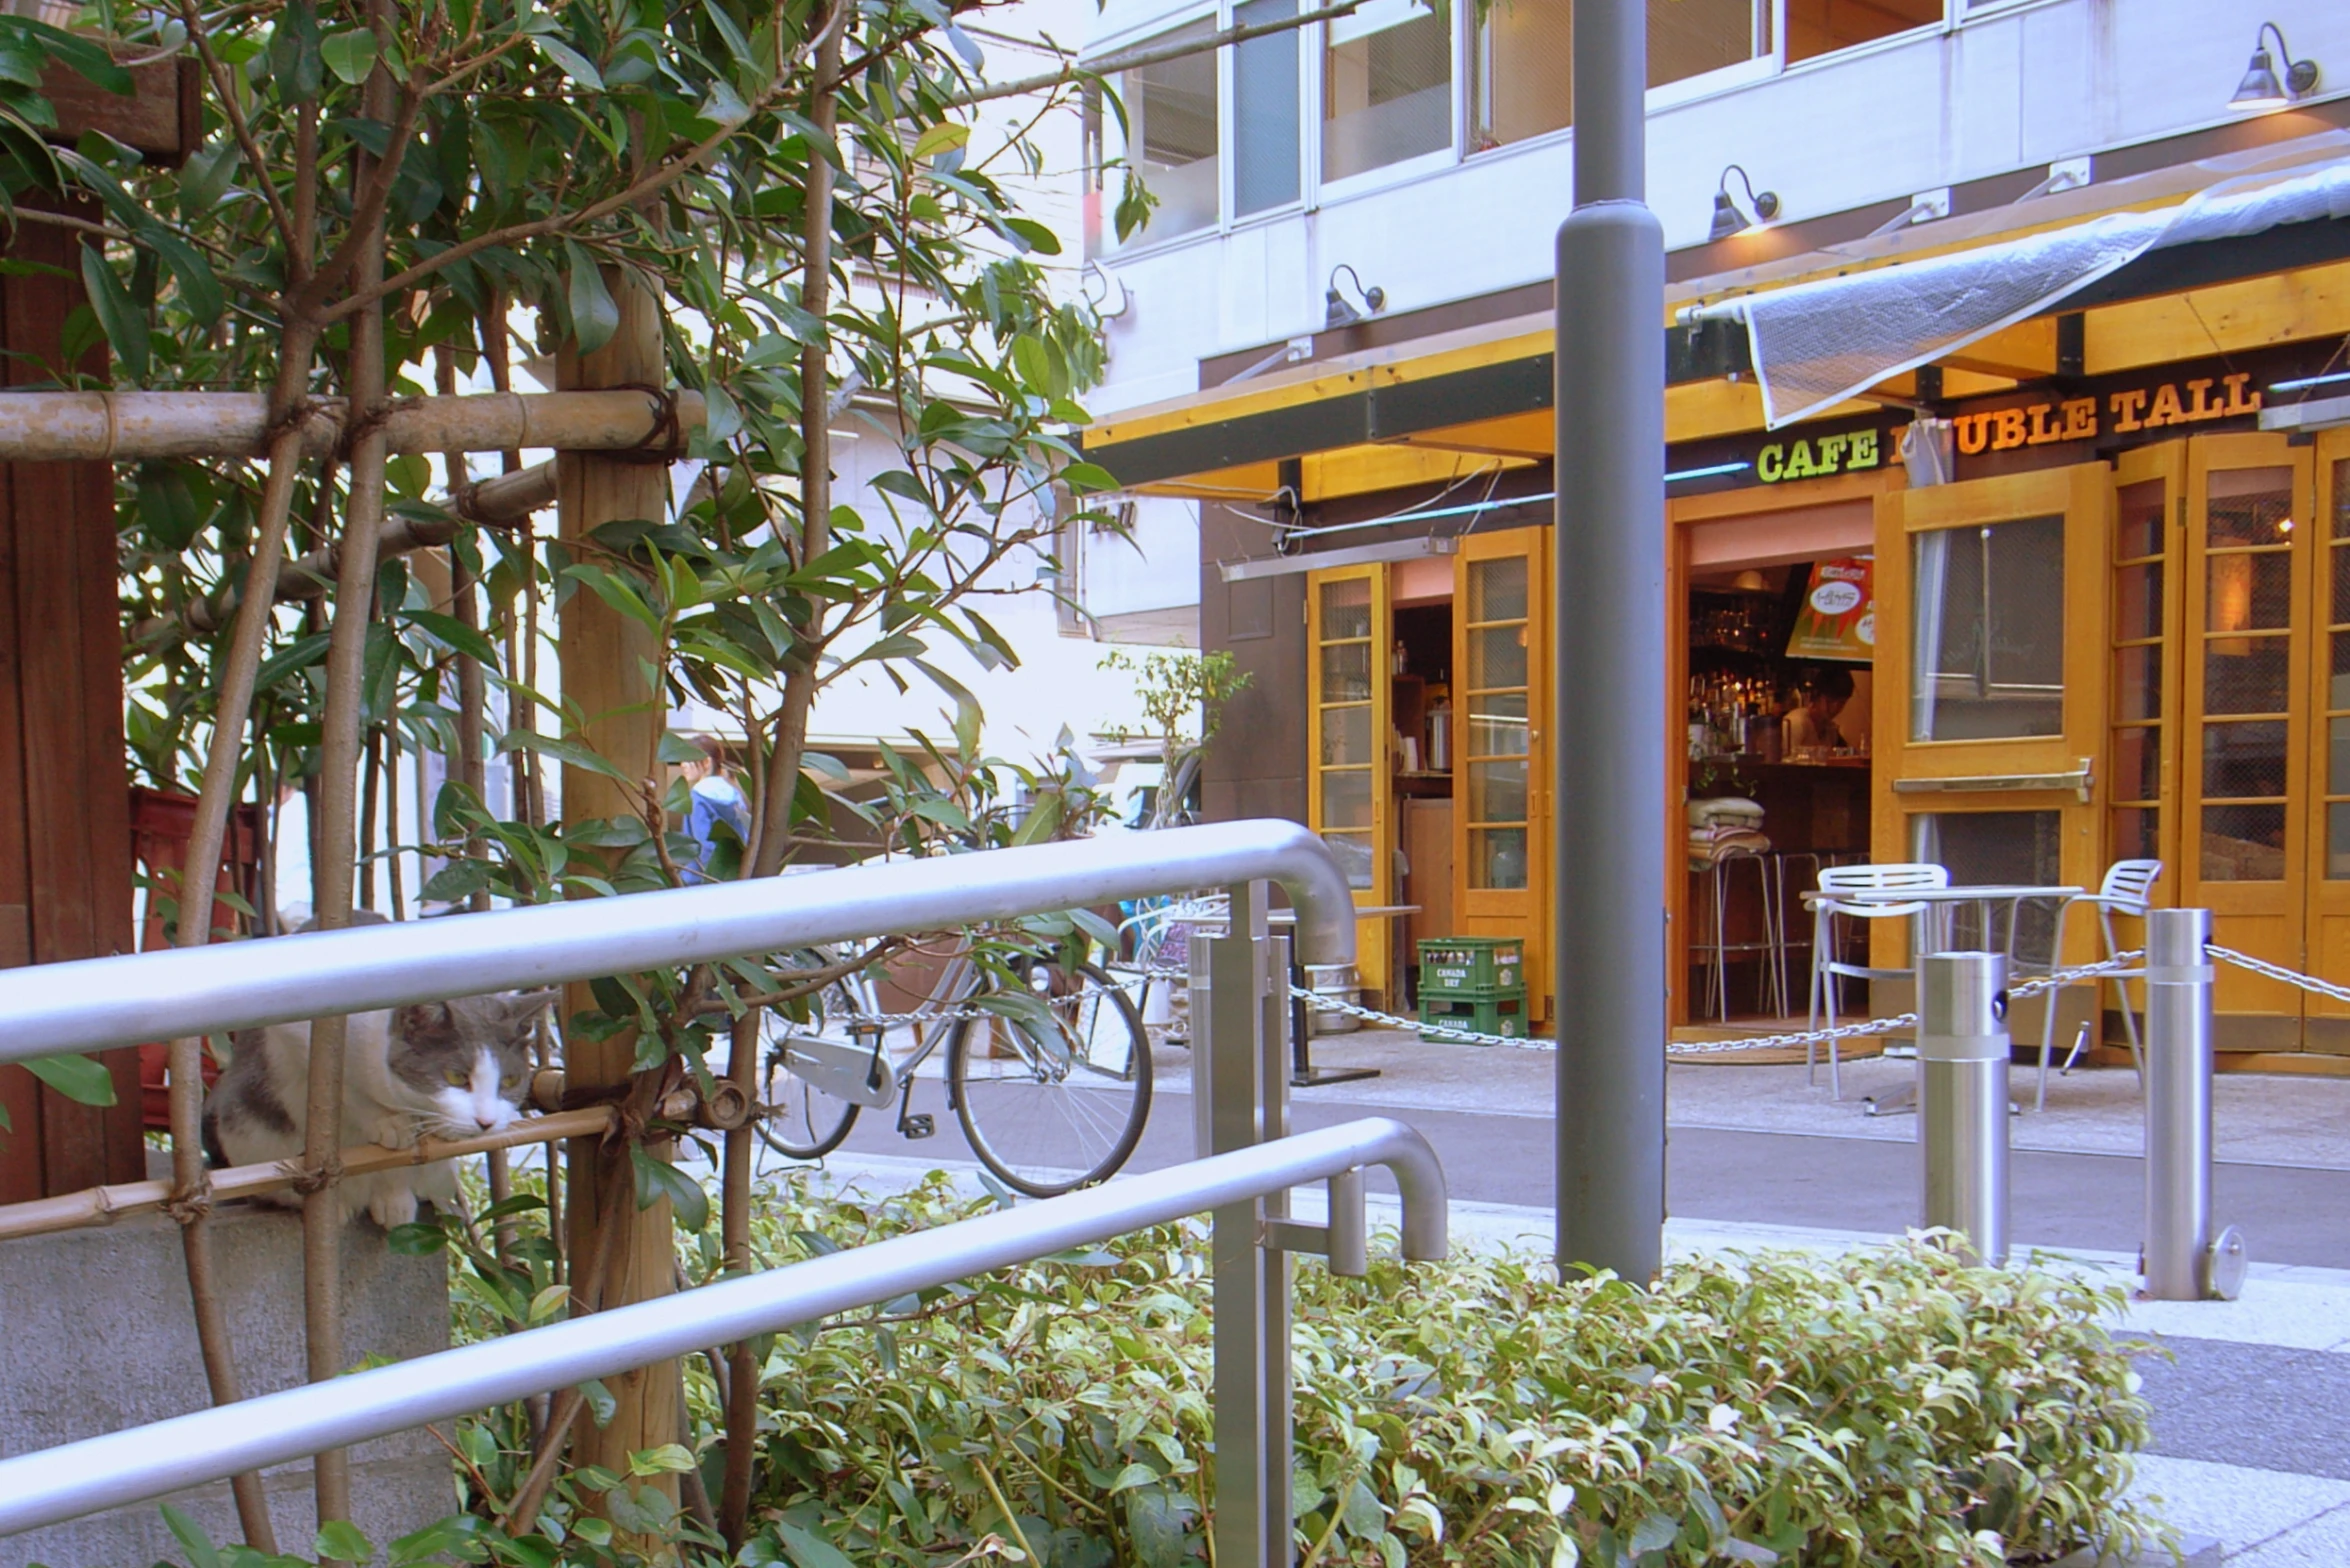 a bicycle rack along side the street in front of a restaurant